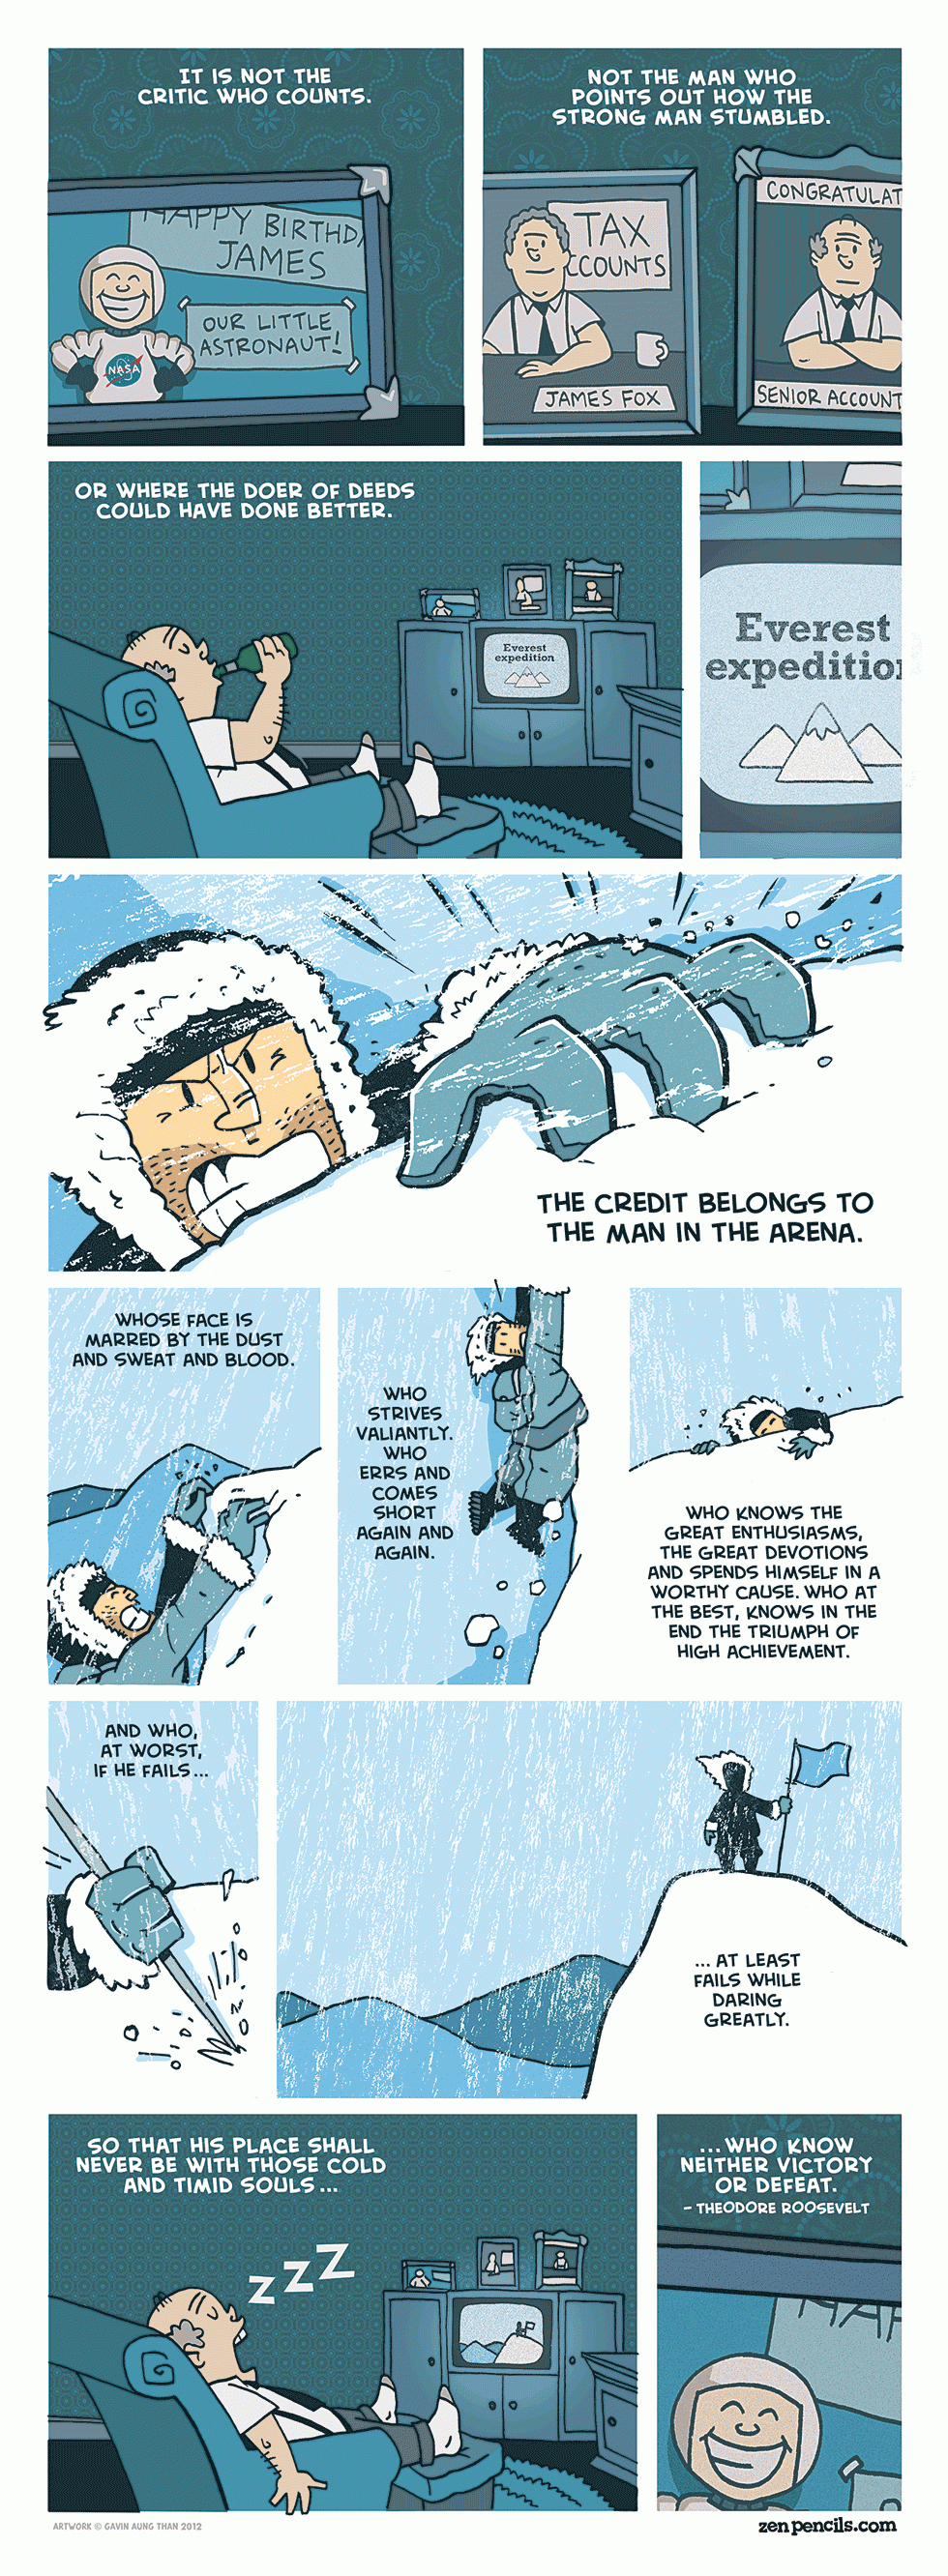 Zen Pencils » 8. Theodore Roosevelt: The Man In The Arena - Man In The Arena Free Printable